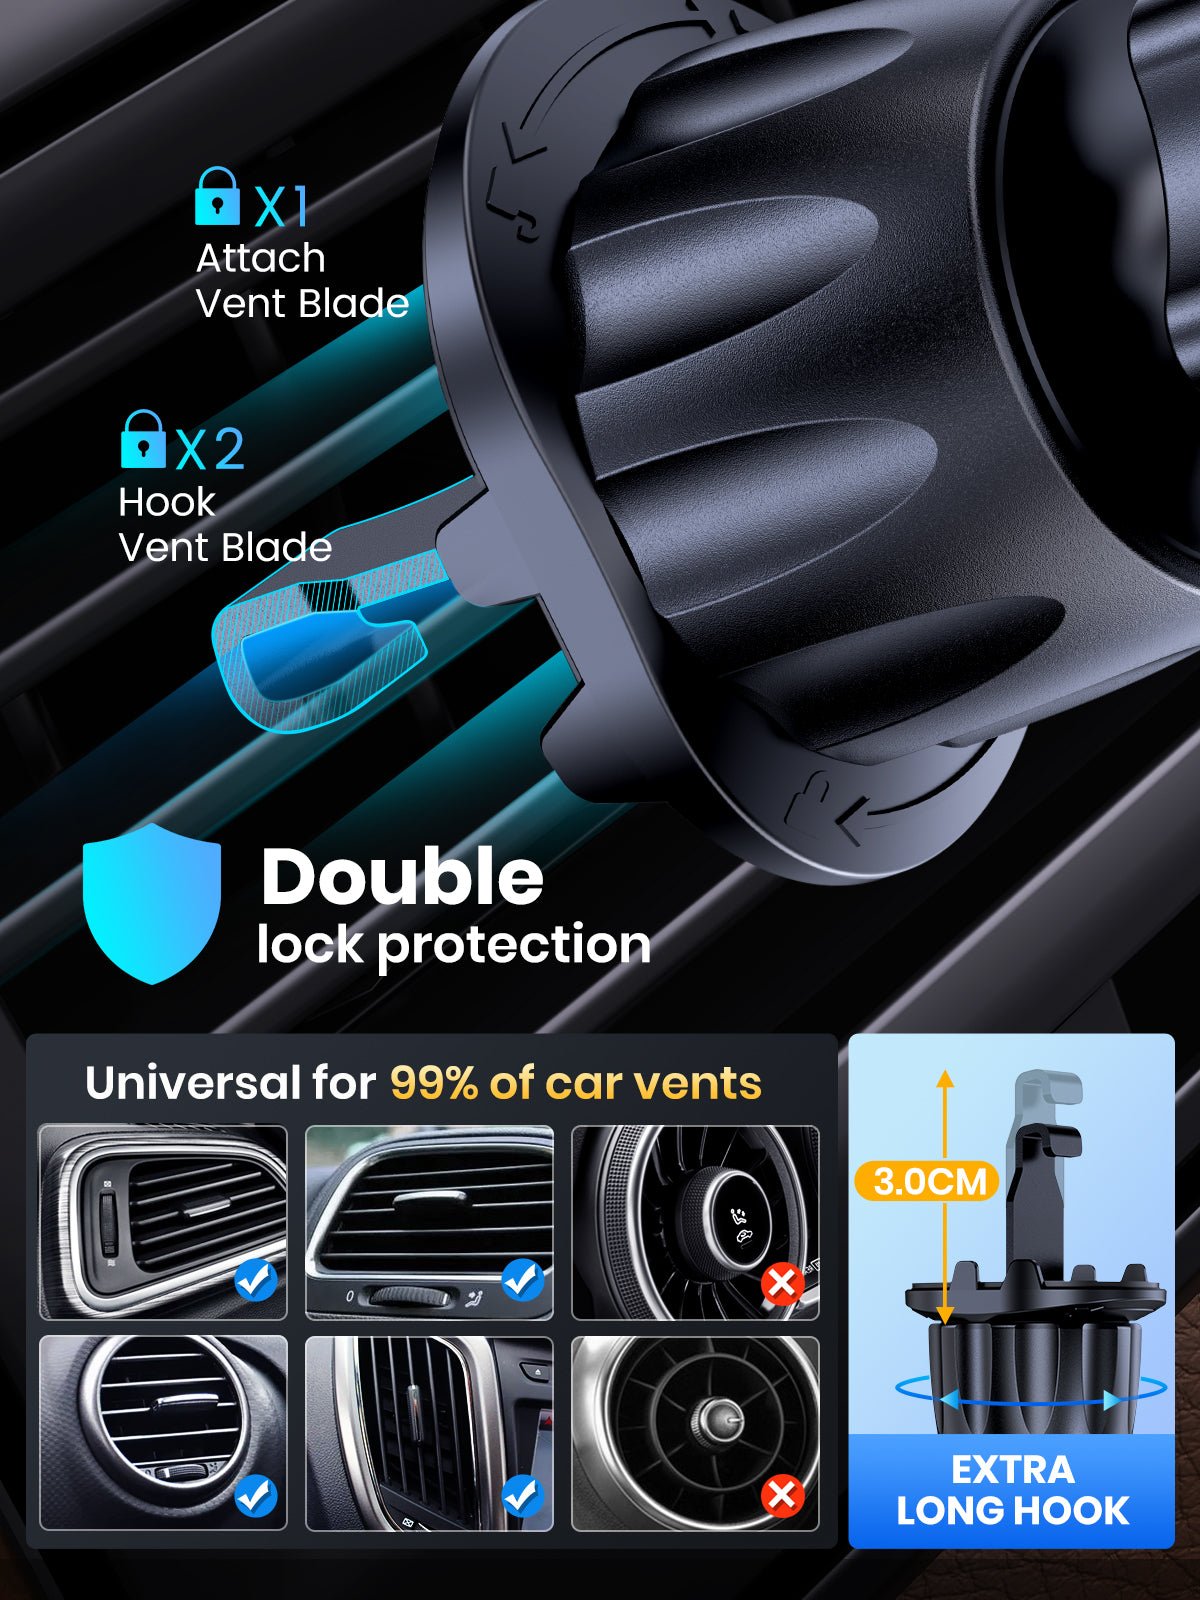 TOPK D37 Magnetic Phone Mount For Car Air Vent - TOPK Official Store